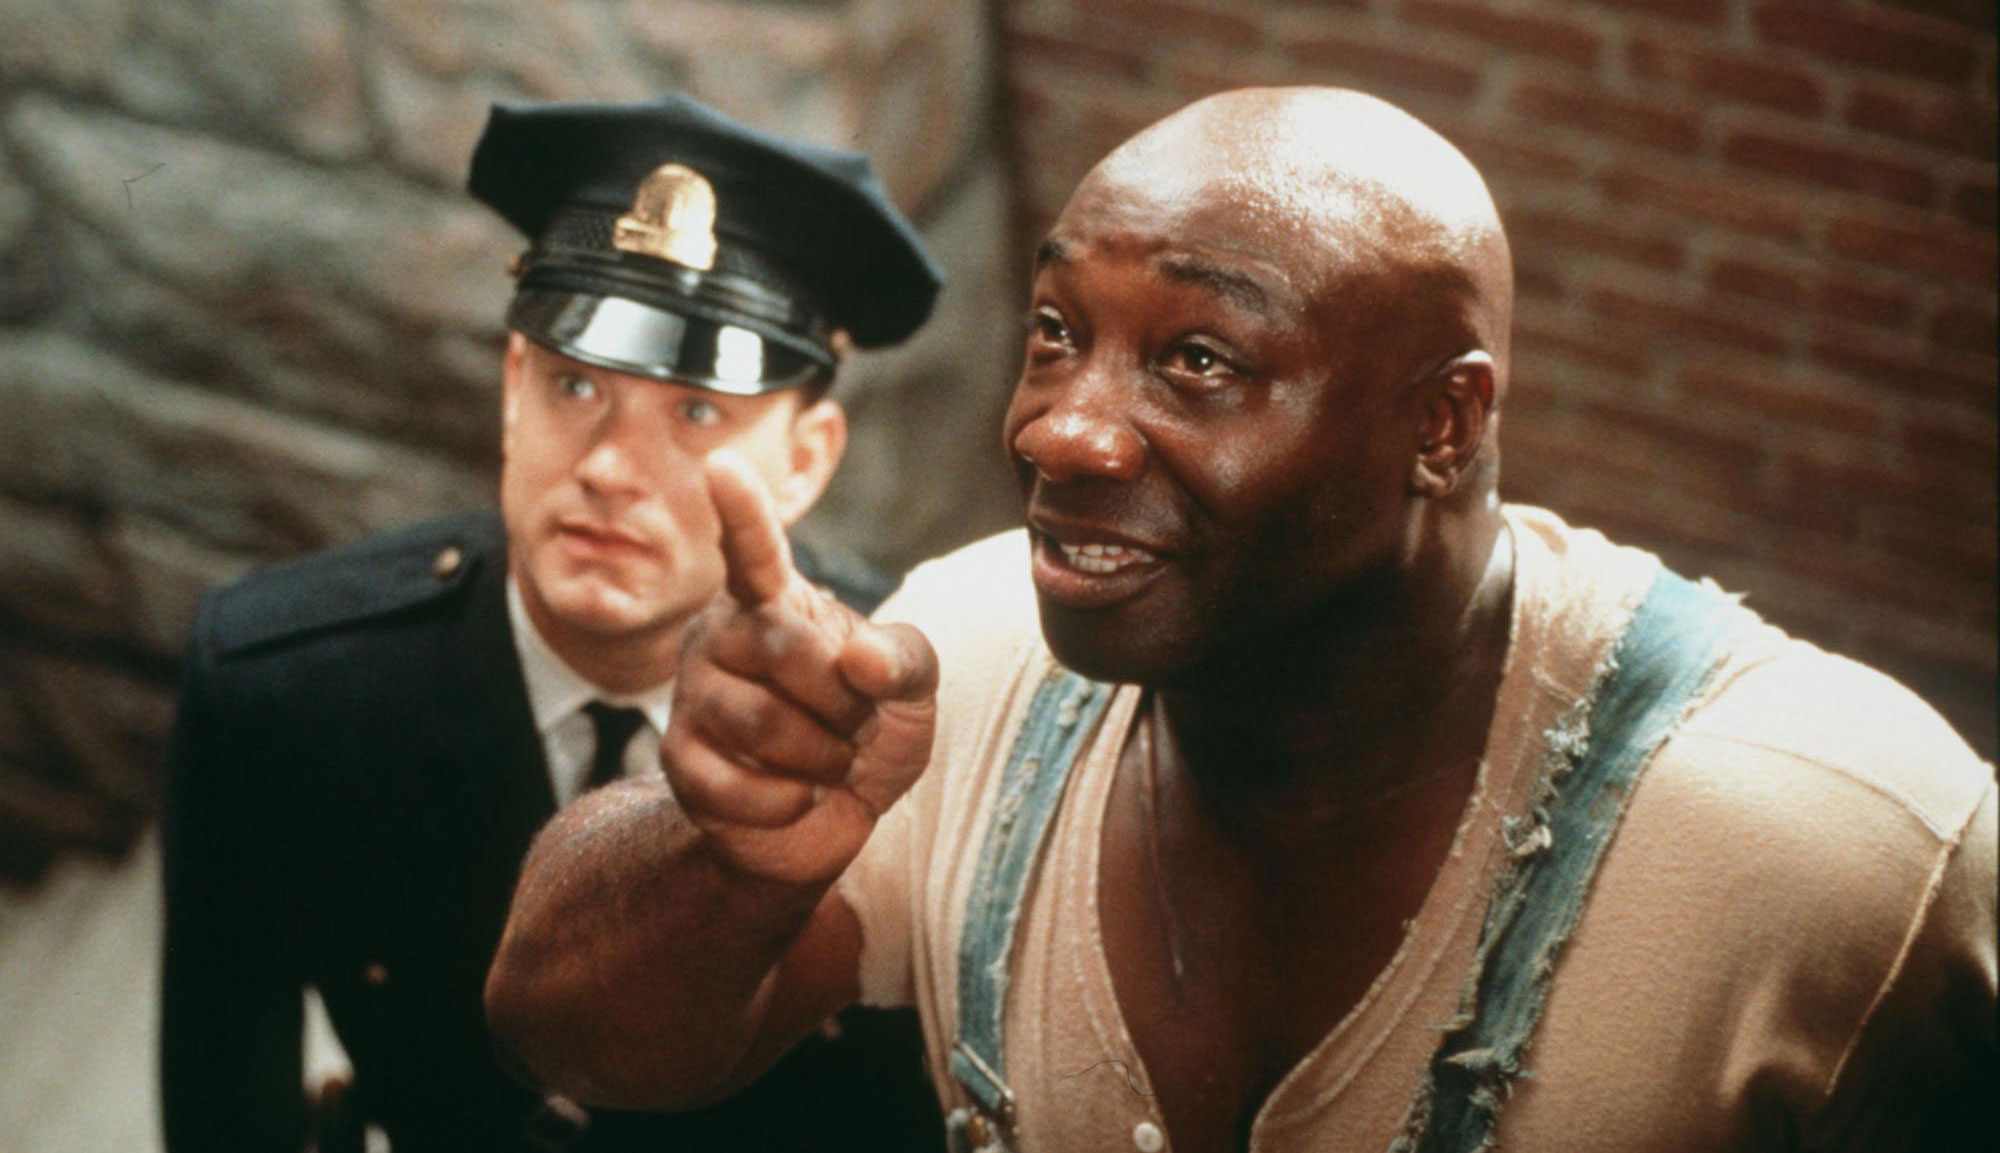 Tom Hanks and Michael Clarke Duncan in "The Green Mile"